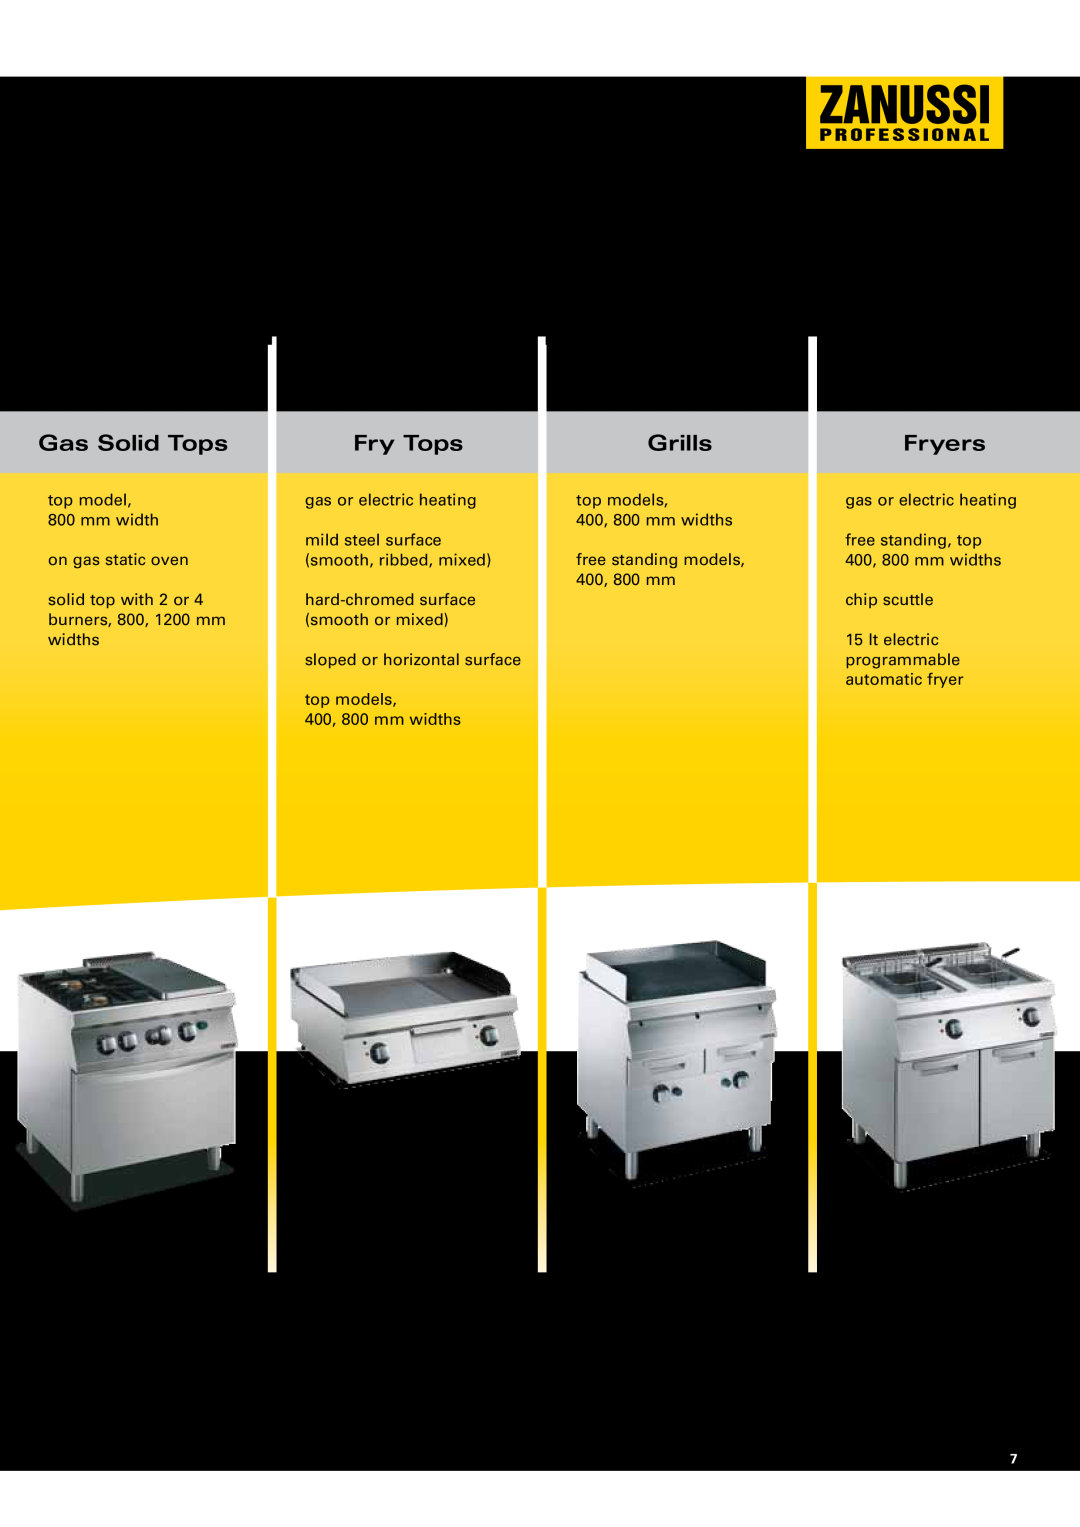 Zanussi EVO700 manual modular cooking line, Gas Solid Tops, Fry Tops, Grills, Fryers 